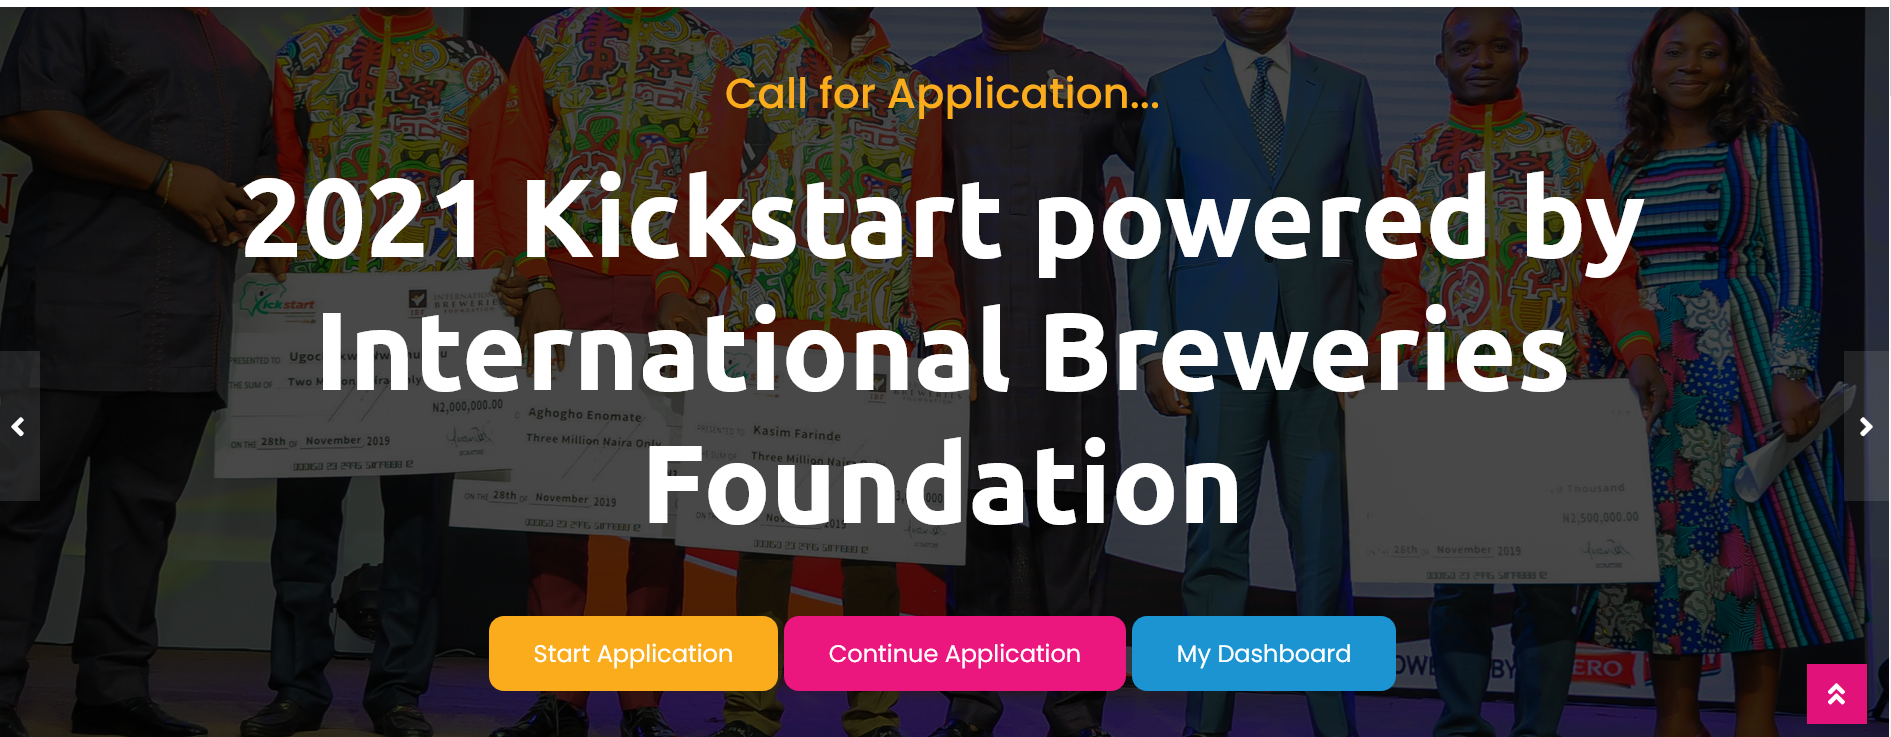 Apply and Win up to N2million Kickstart Grant Programme powered by International Breweries Foundation